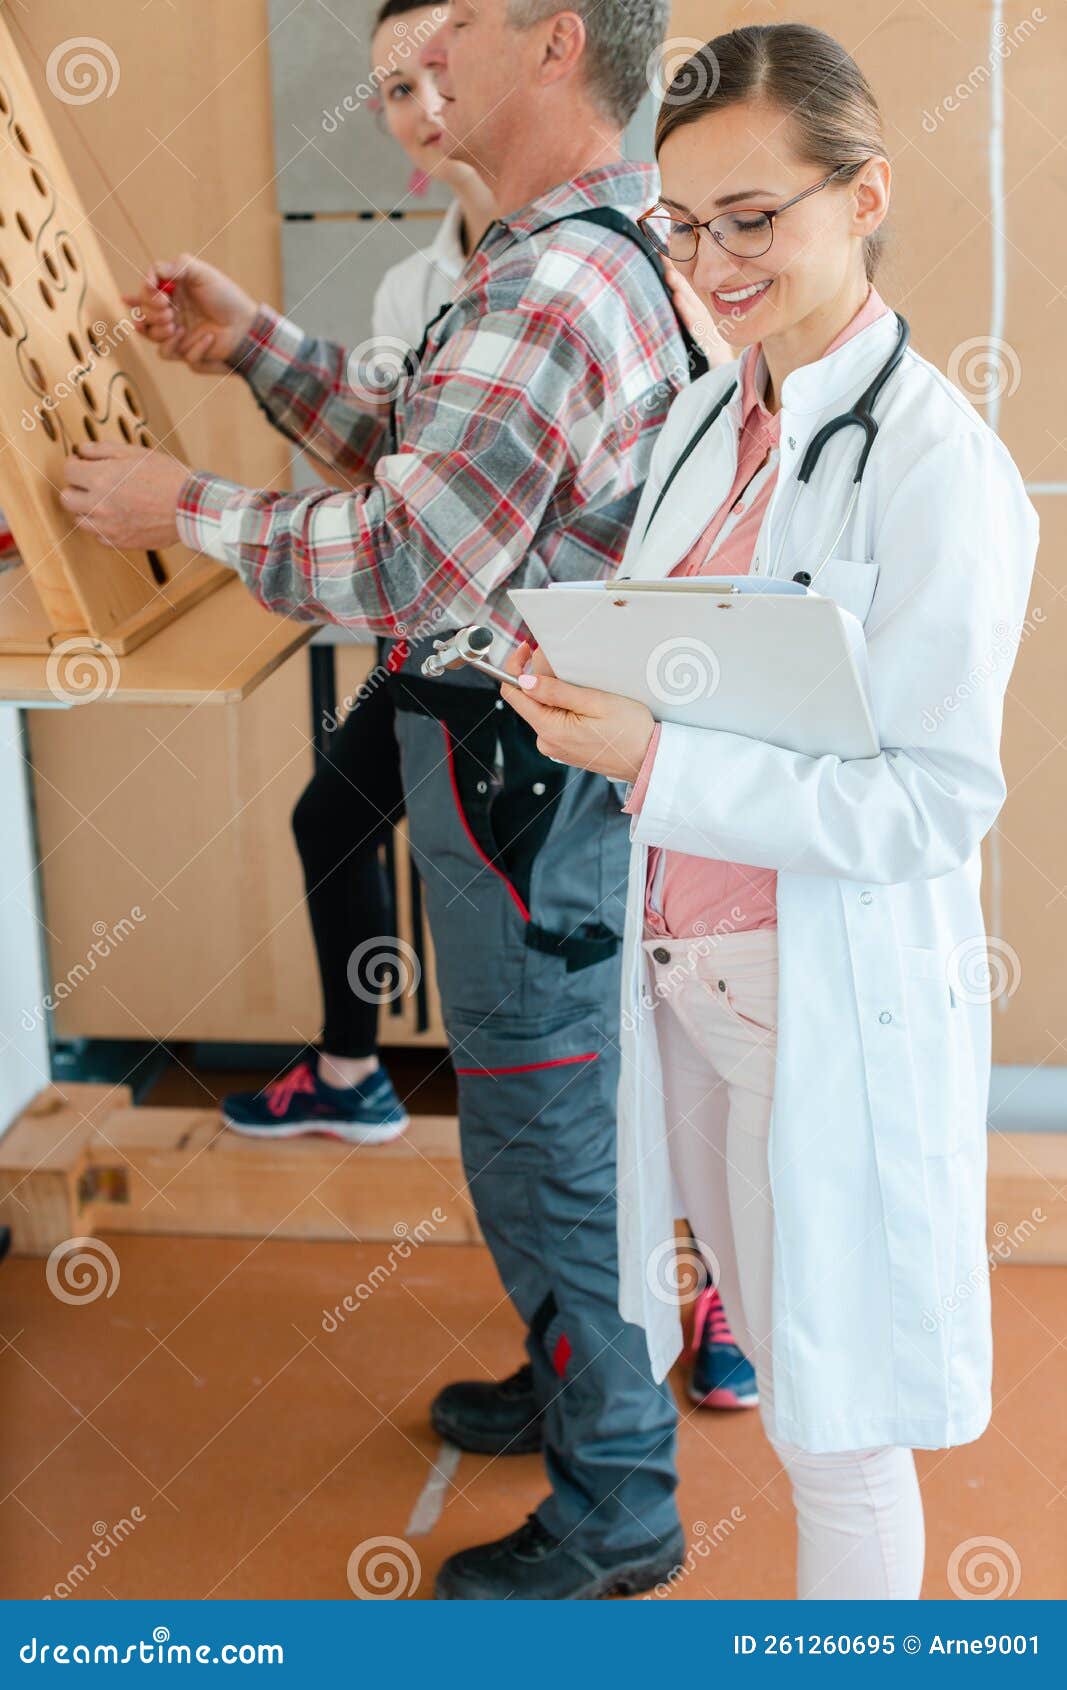 doctor writing down results from occupational therapy dexterity test